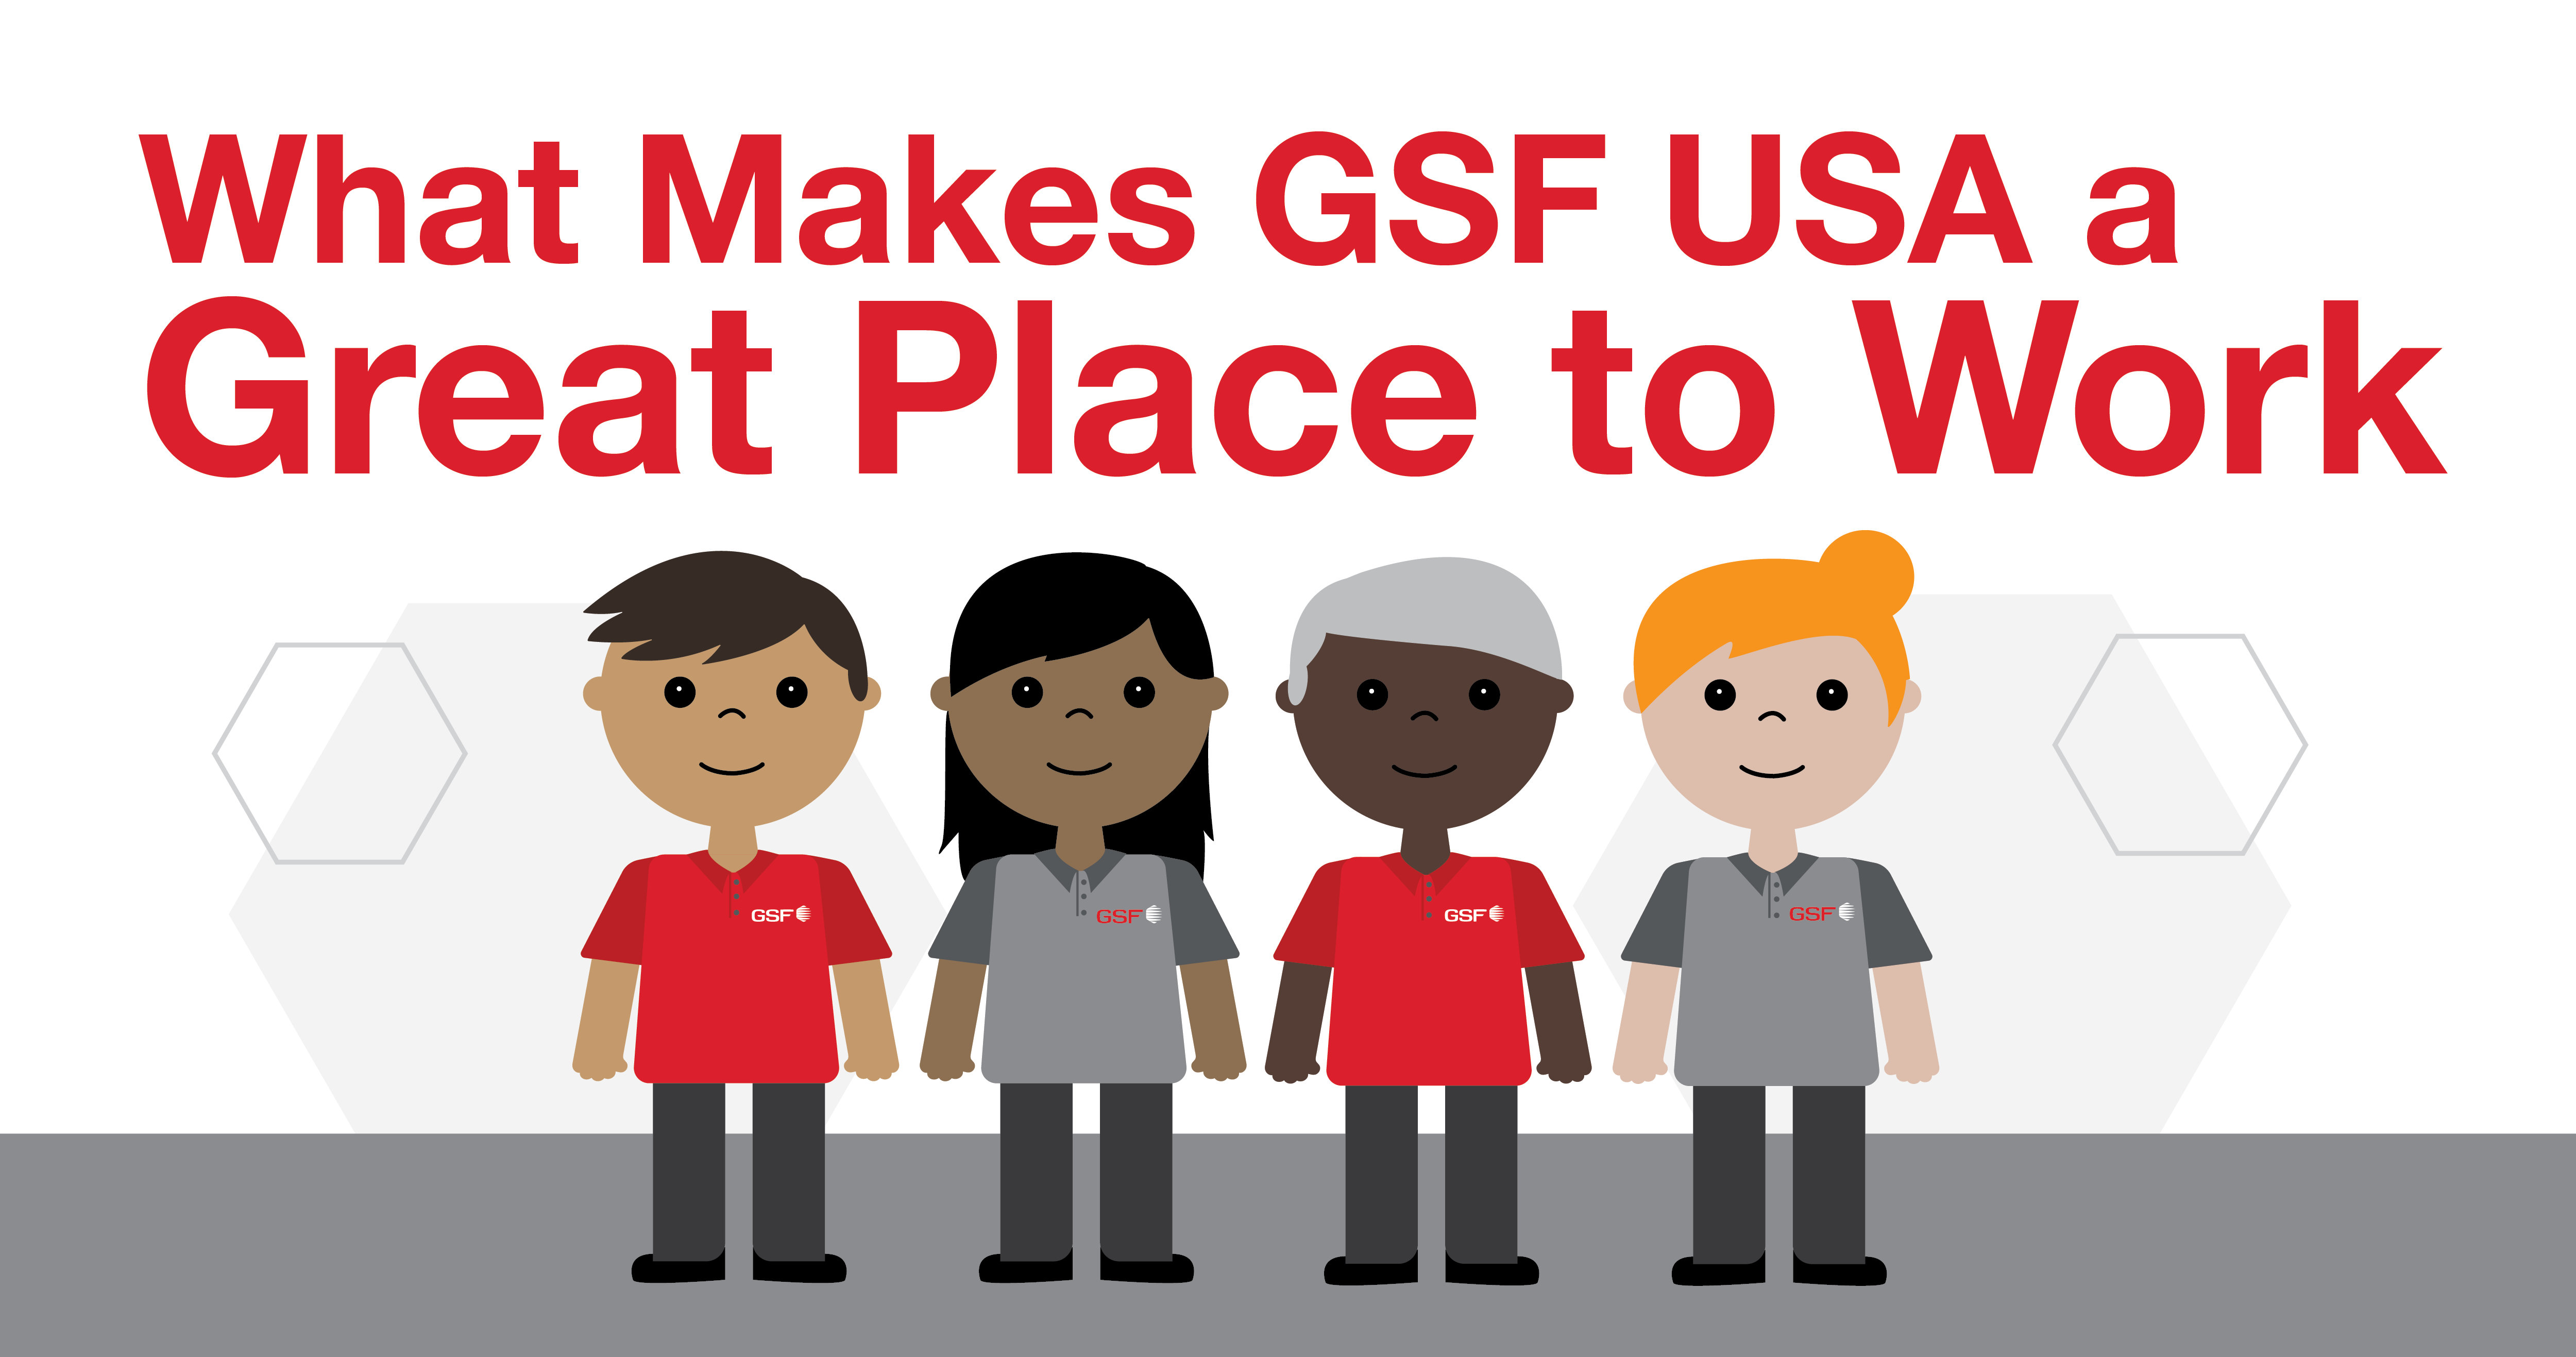 Graphic of GSF workers illustrating what makes the company great to work for